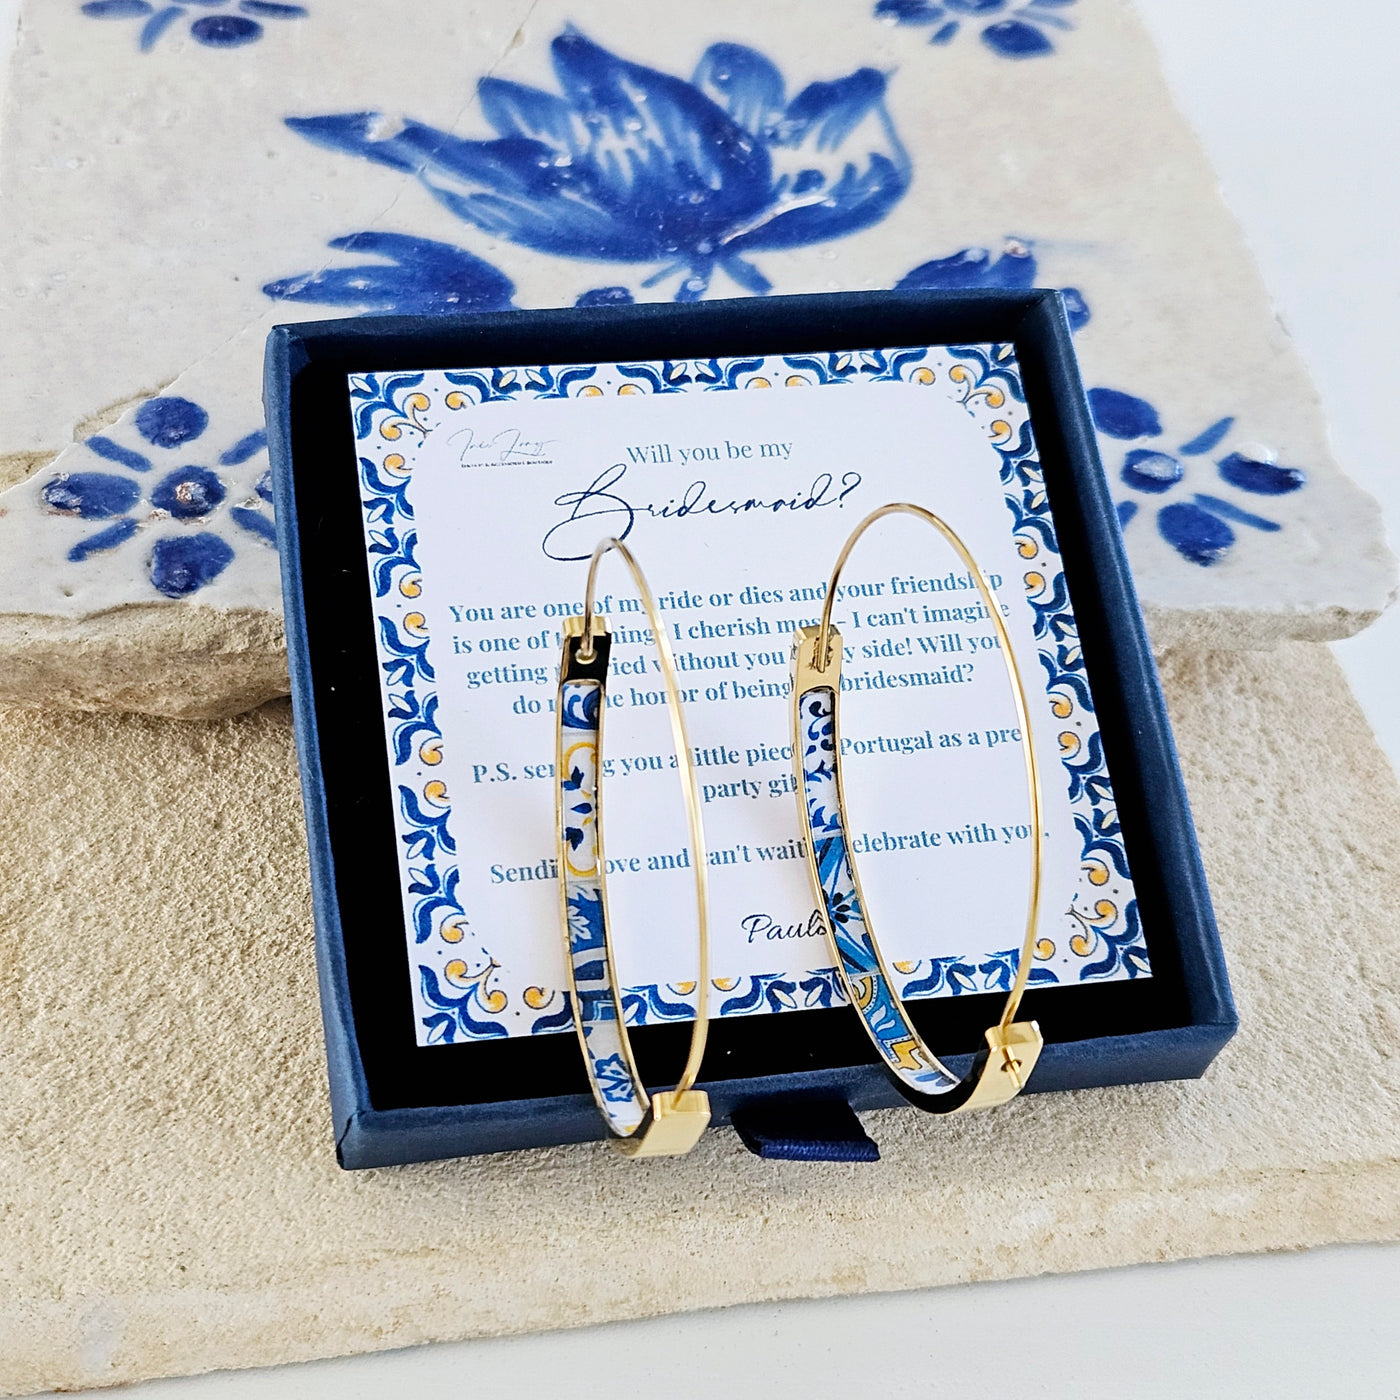 Bridesmaid Proposal Gold Hoop Earring Personalized Message Card Will You Be My Bridesmaid Gift Wedding Bridesmaid Custom Memento Jewelry